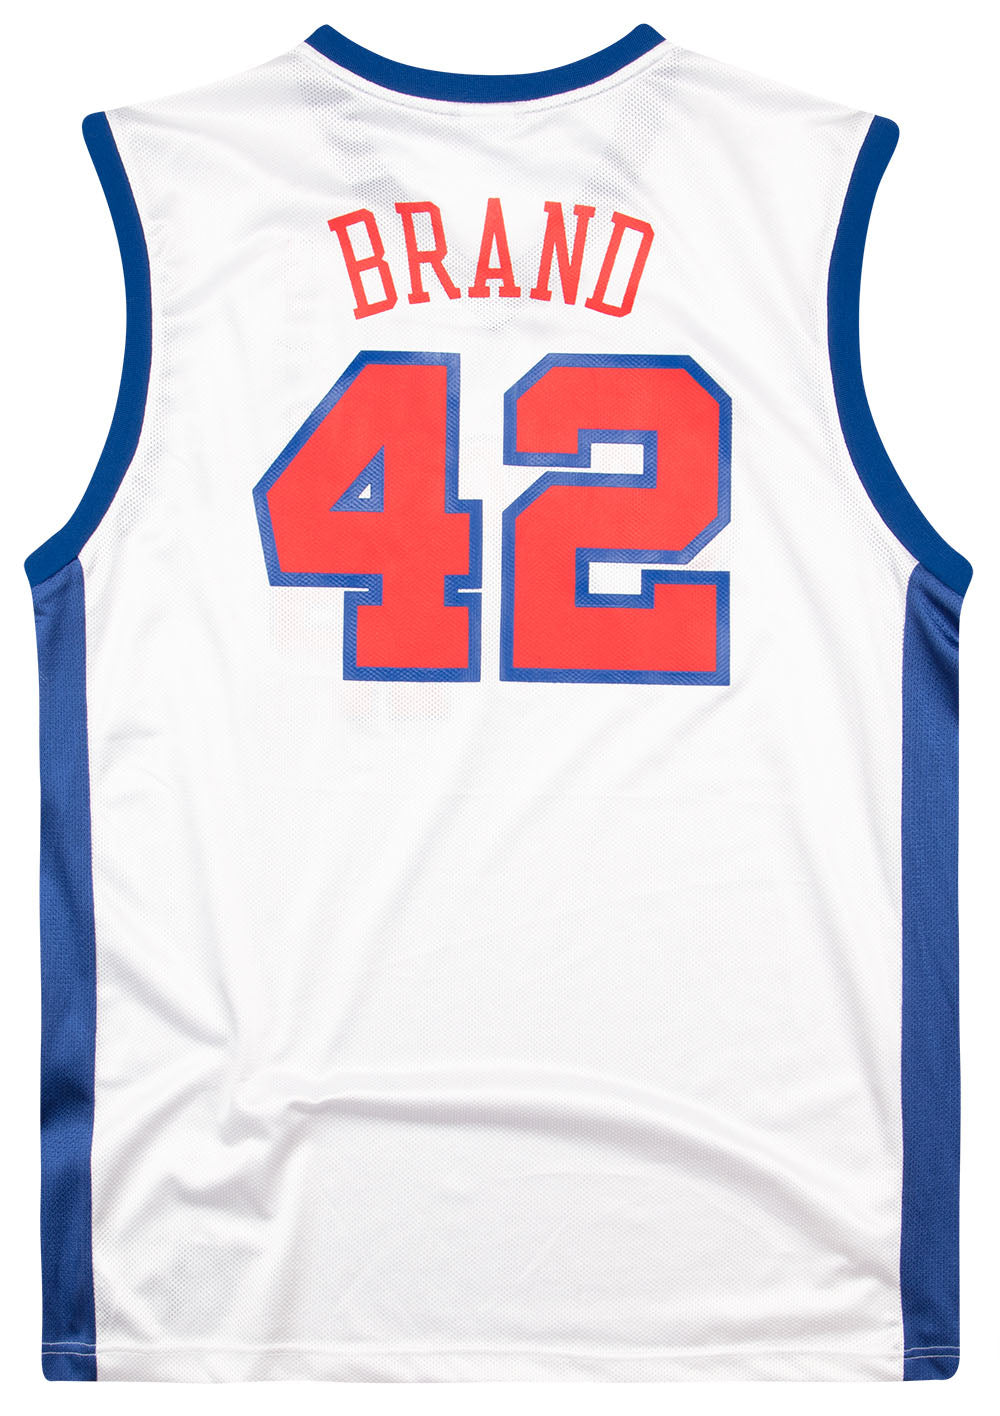 Clippers Authentic Elton Brand Jersey size 52/2X – Mr. Throwback NYC